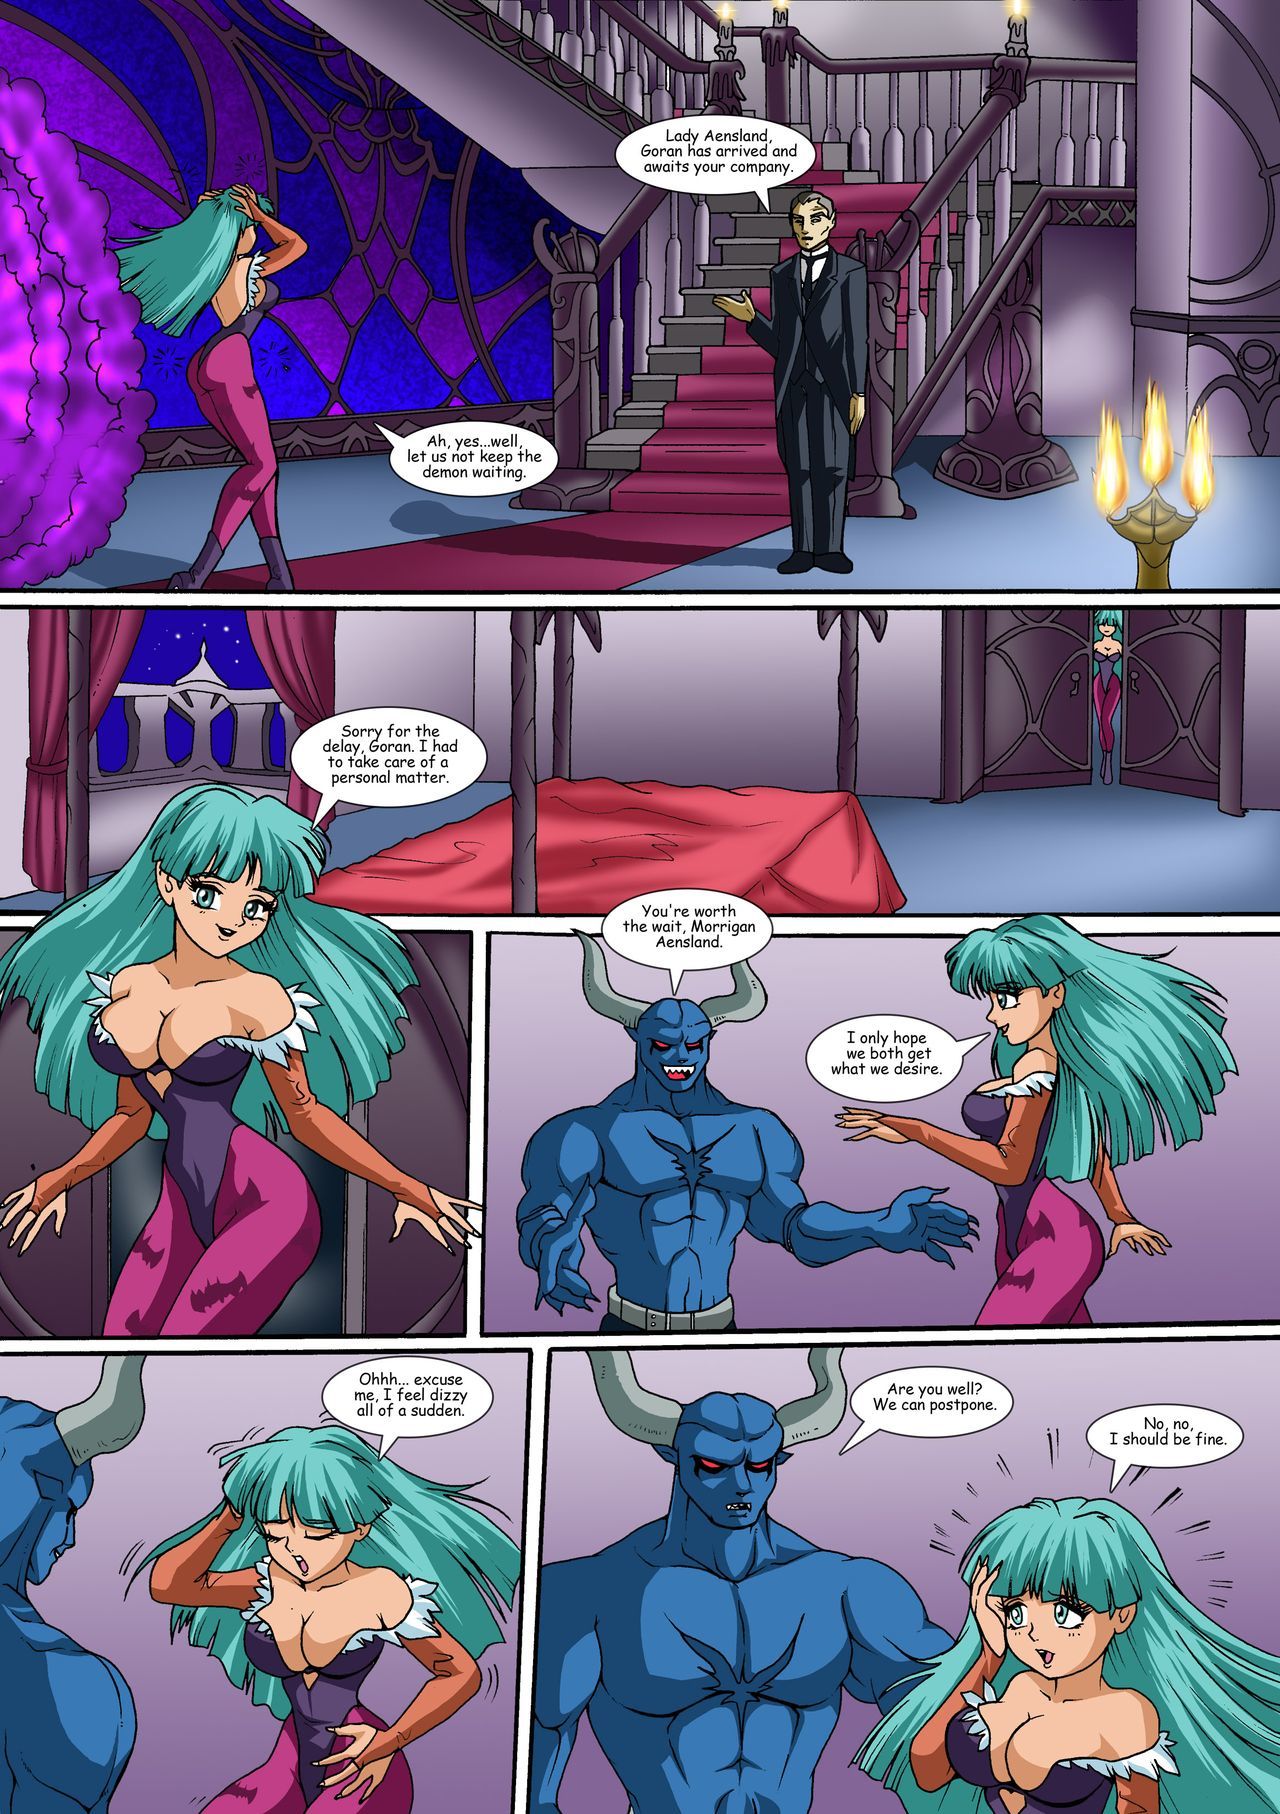 The Shrinking Succubus (Darkstalkers) by Palcomix page 4